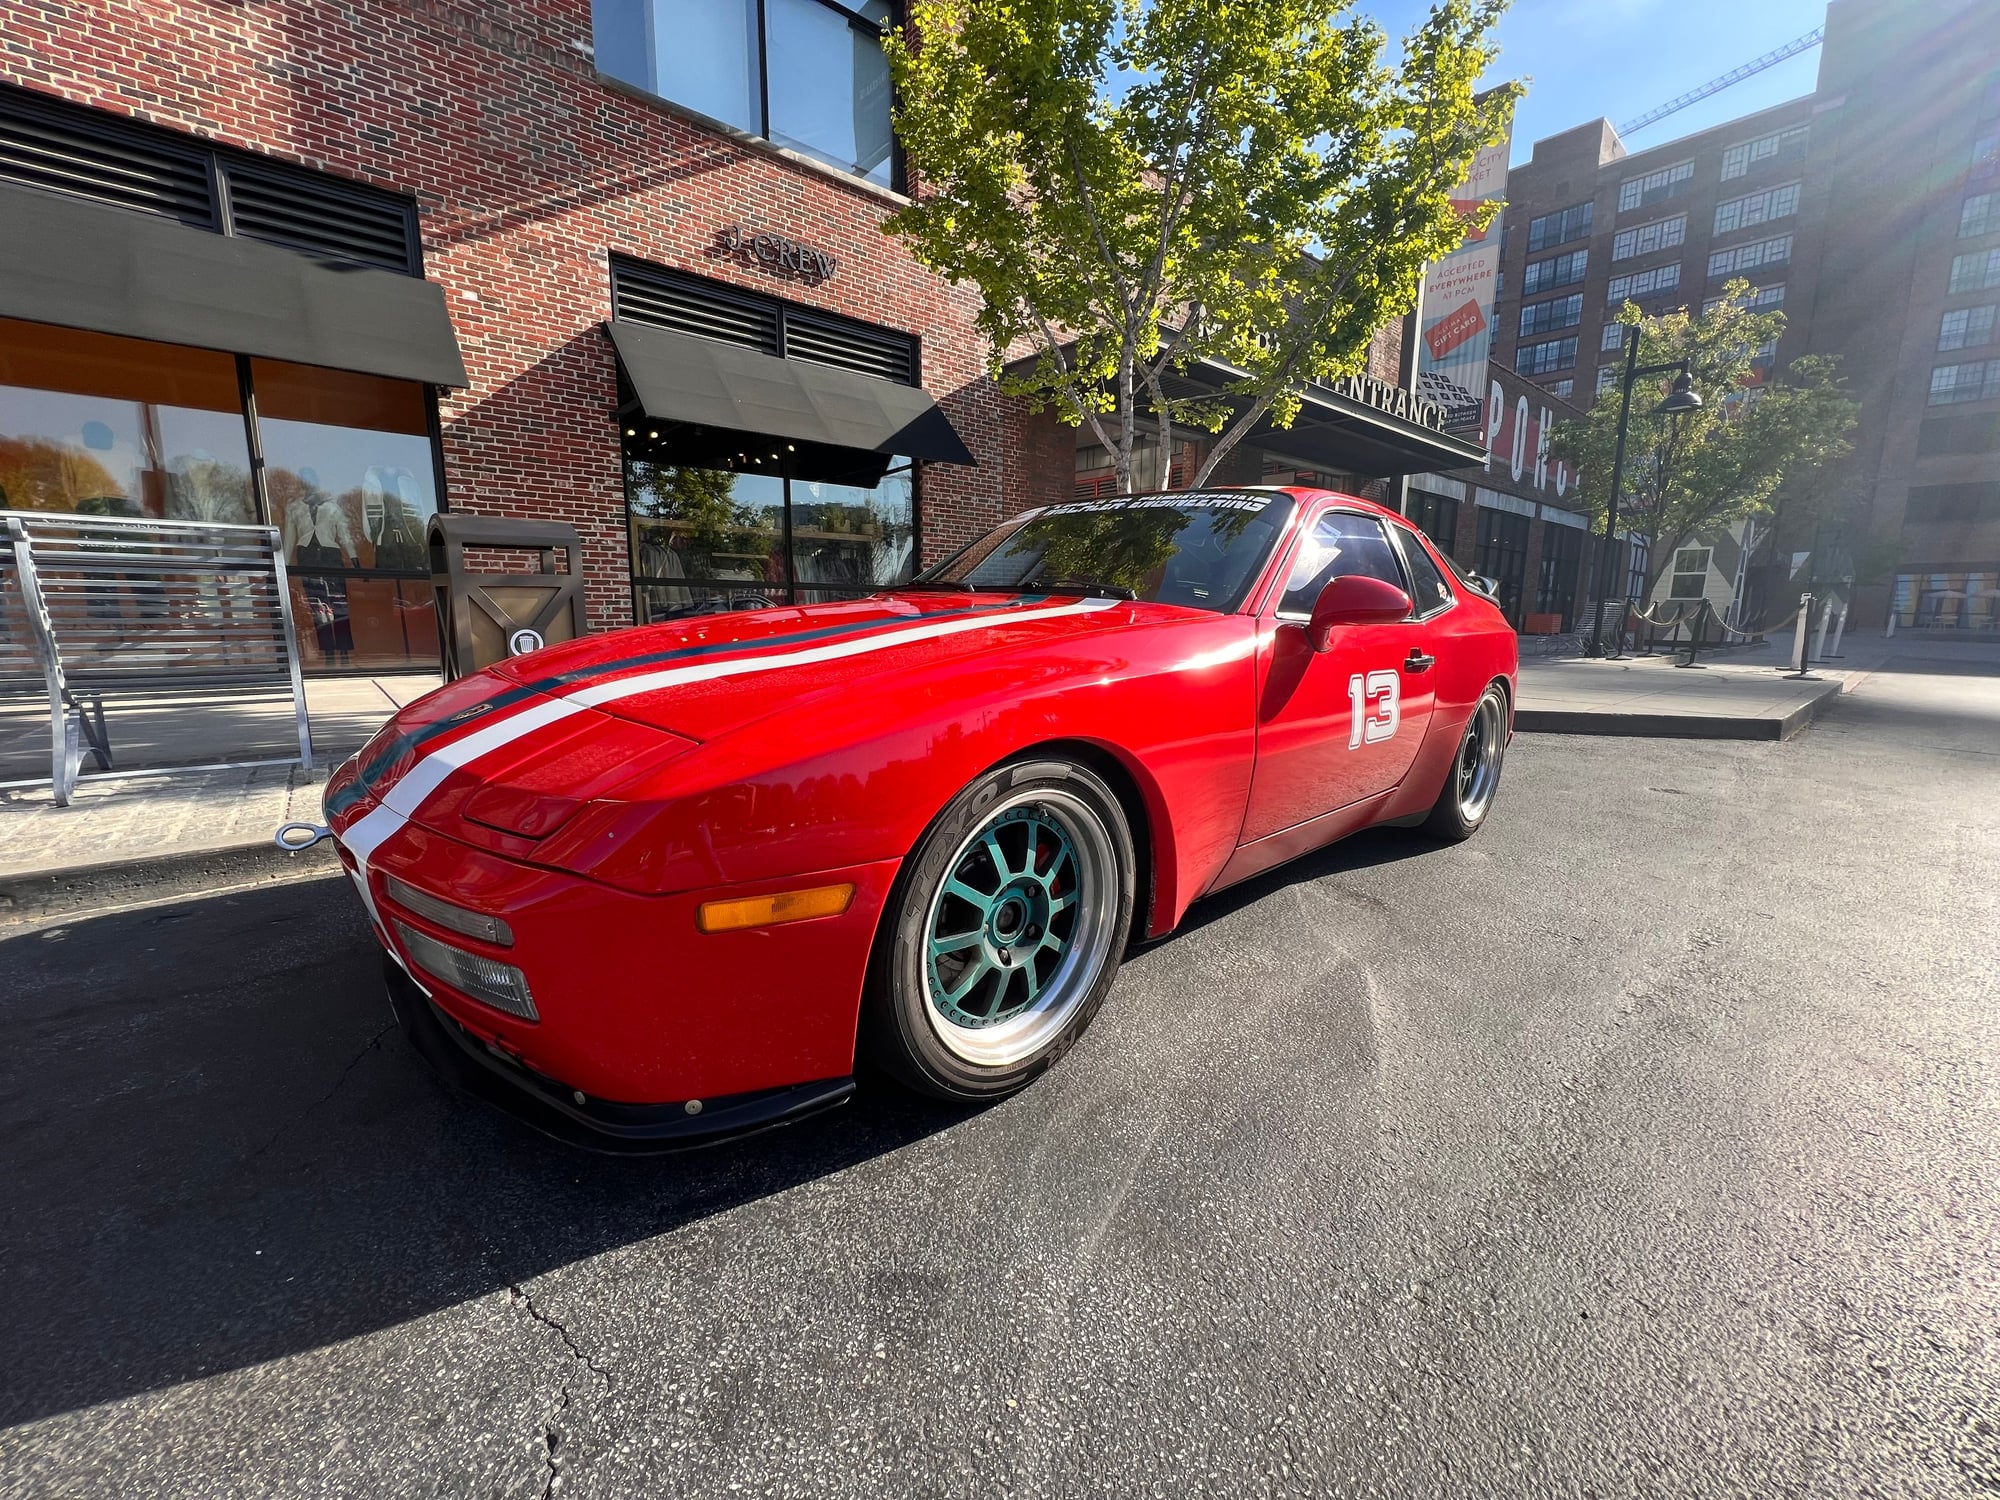 1986 Porsche 944 - Street legal 944 V8 (LS2) 951 track car - Used - VIN WP0AA0954GN155552 - 120,000 Miles - 8 cyl - 2WD - Manual - Coupe - Red - Atlanta, GA 30306, United States